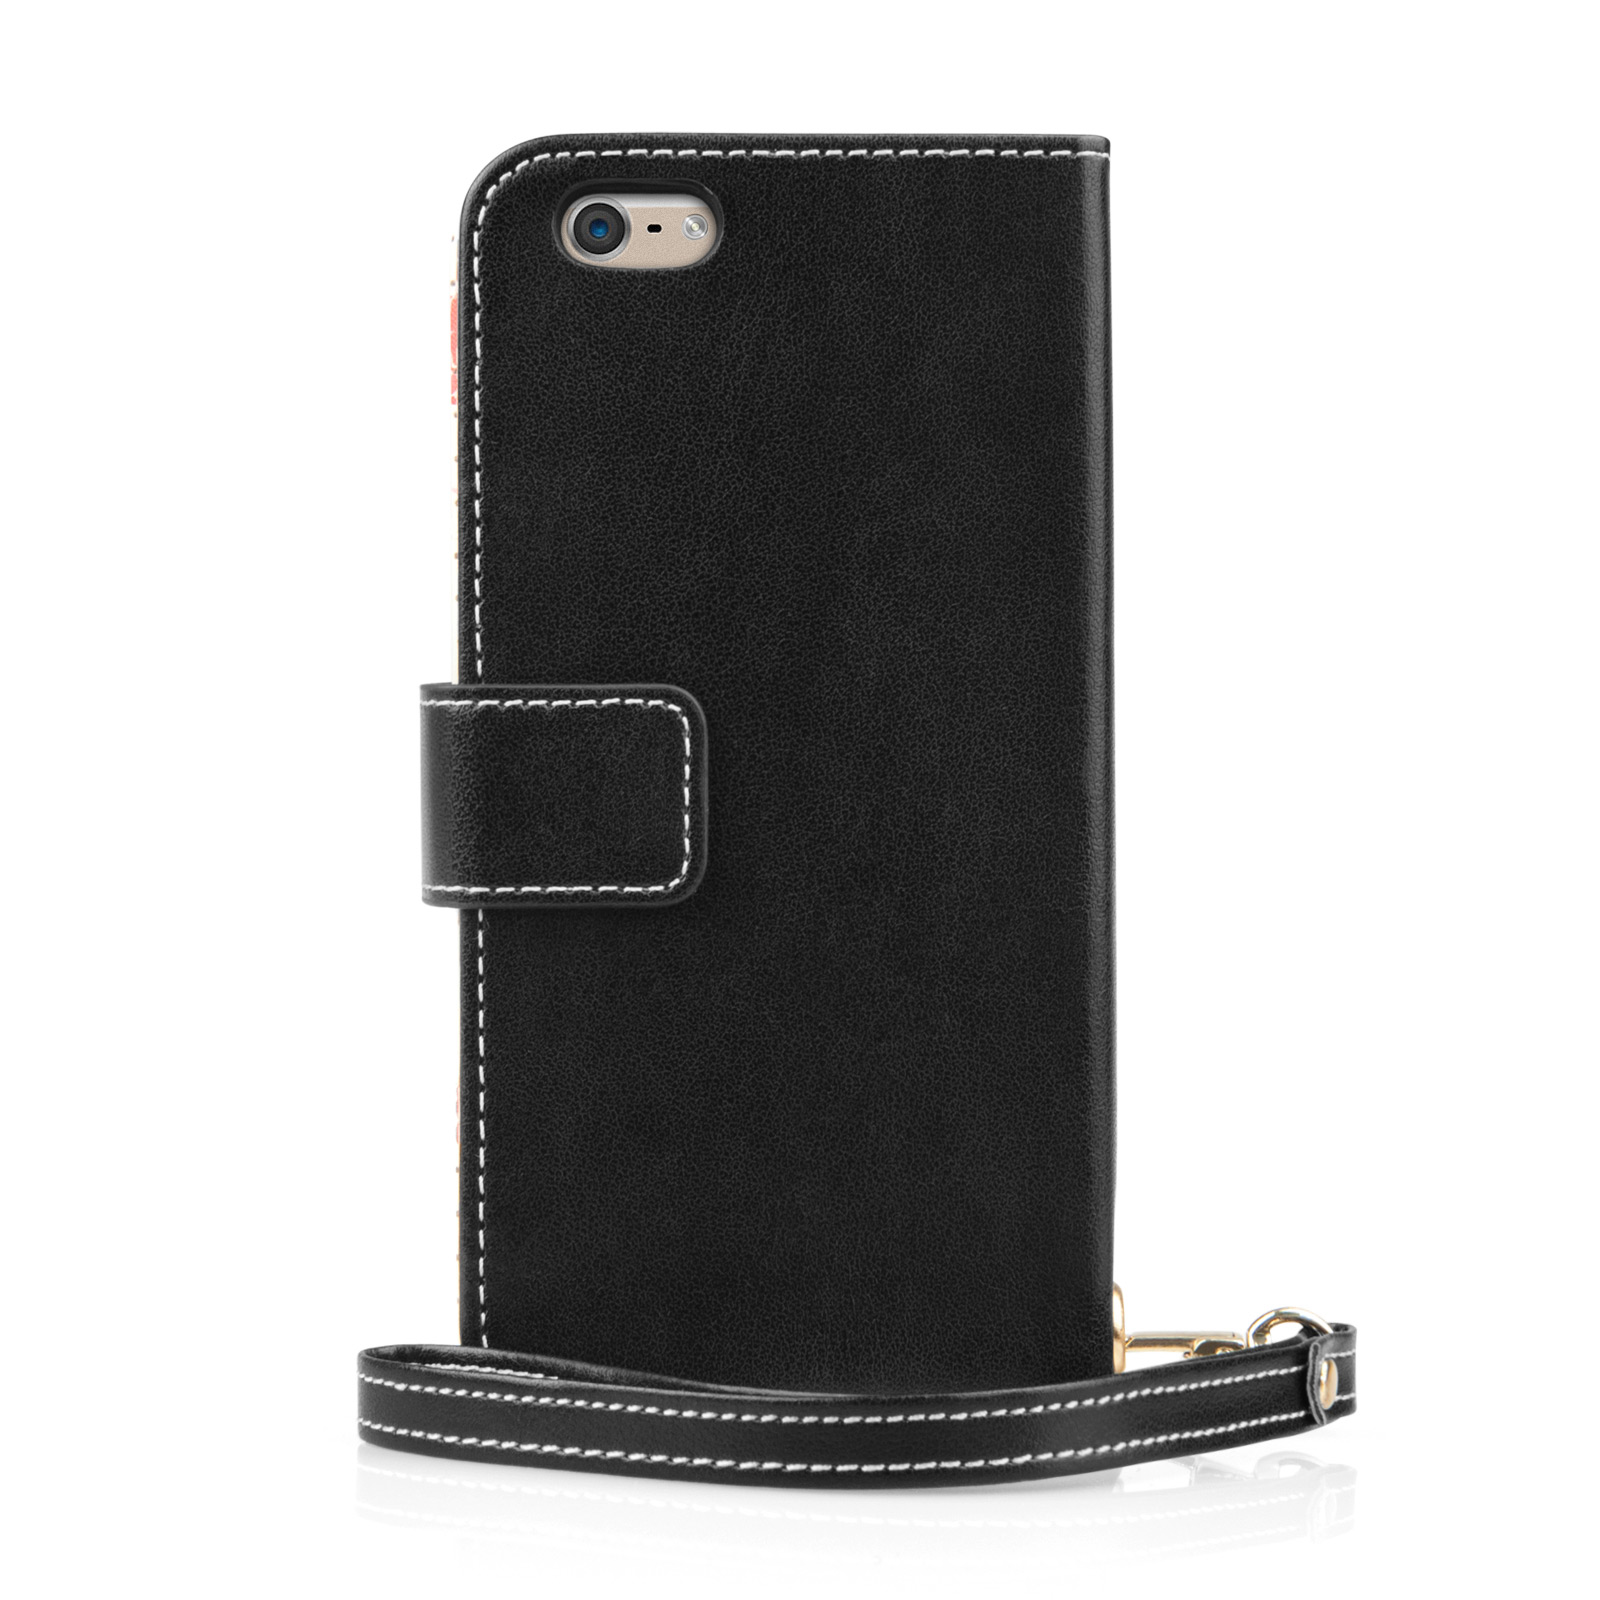 Caseflex iPhone 6 and 6s Leather-Effect Wallet Case – Black with Floral Lining